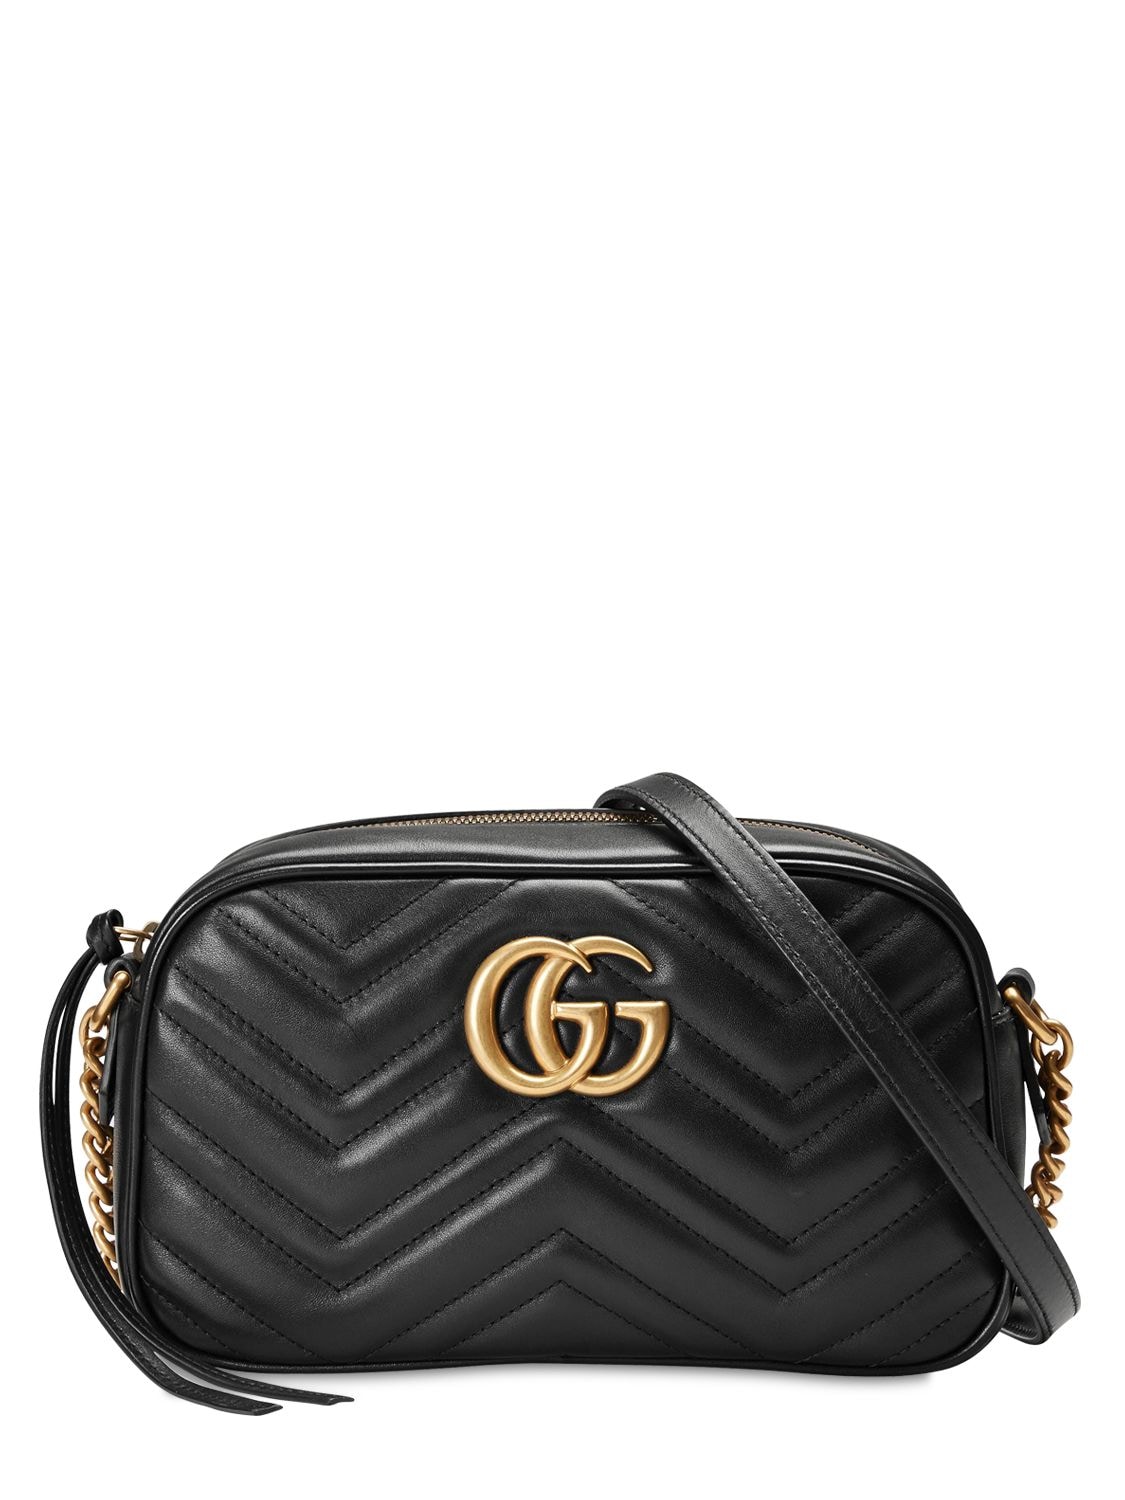 Image of Gg Marmont Leather Camera Bag